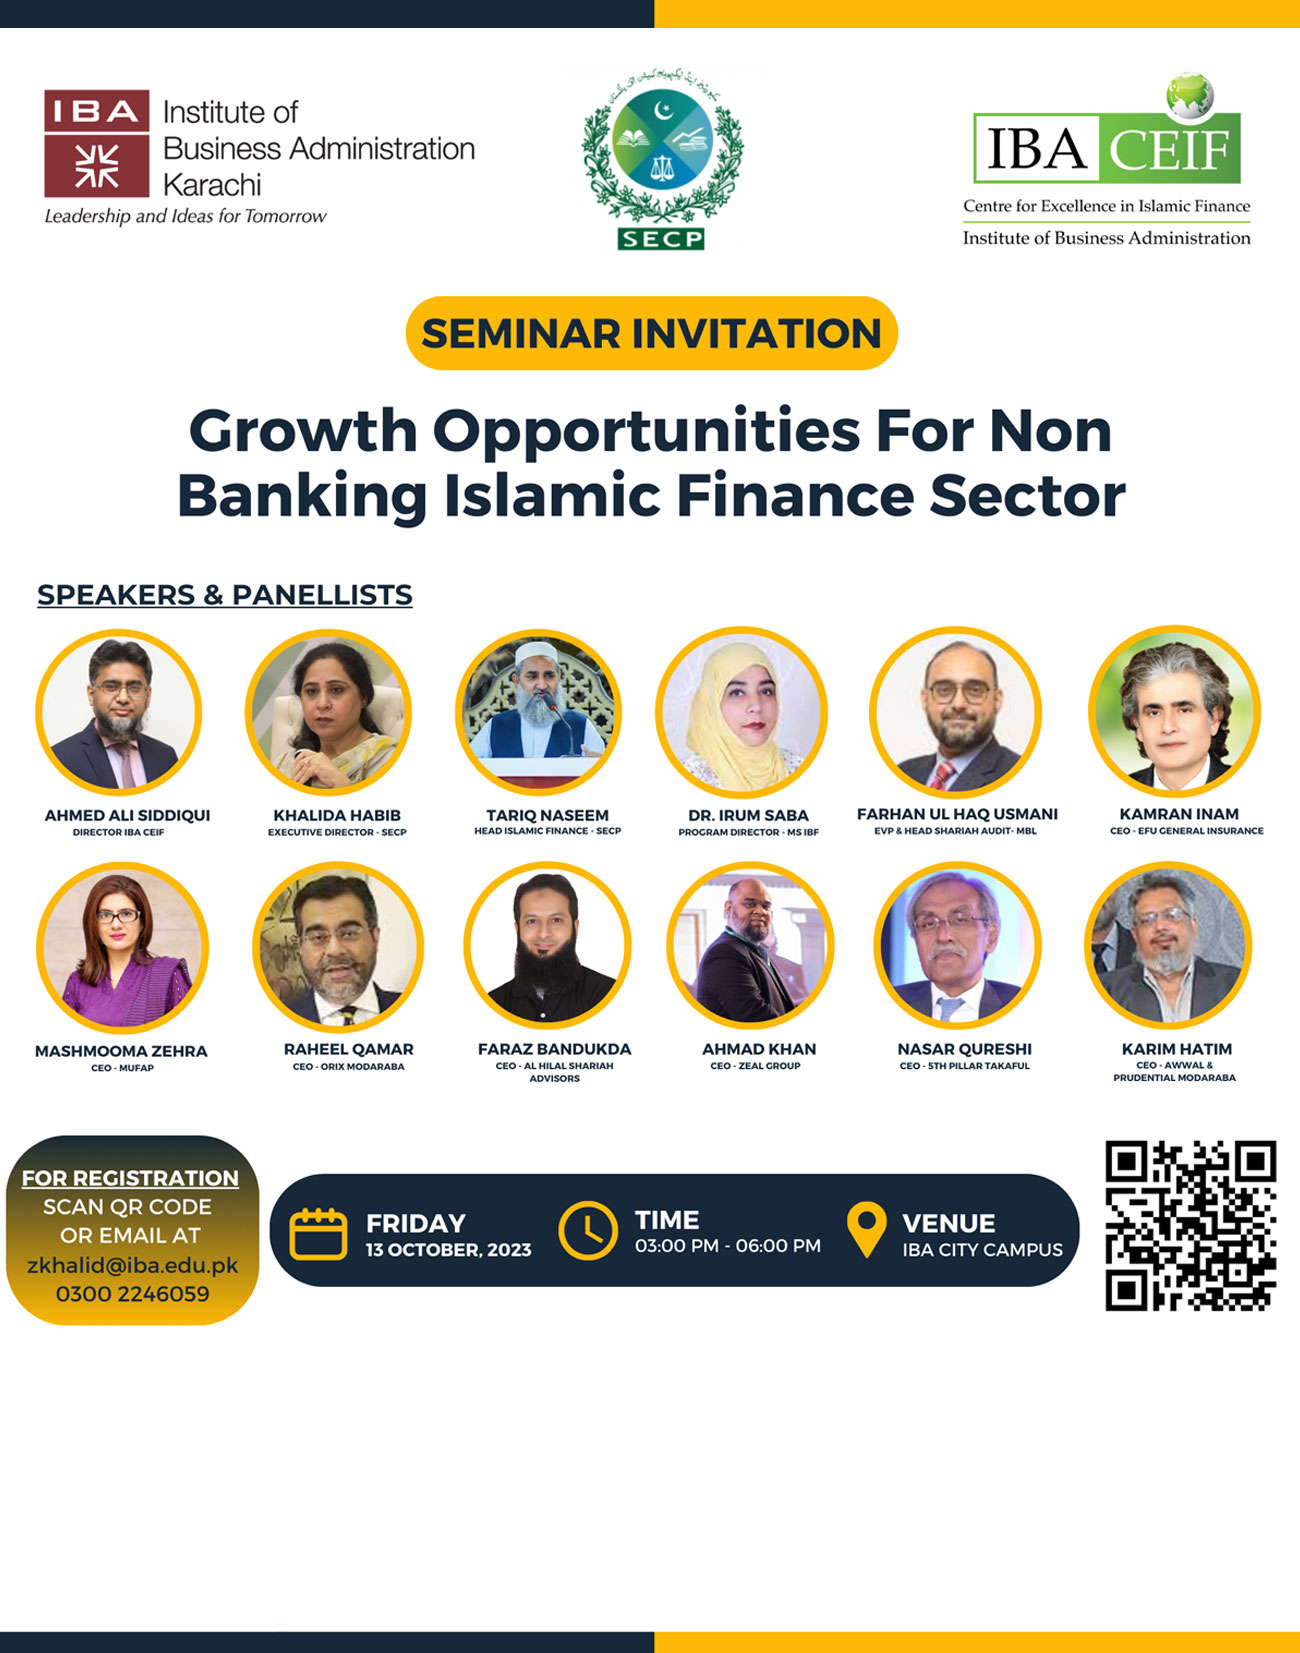 Seminar on Growth Opportunities For Non-Banking Islamic Finance Sector